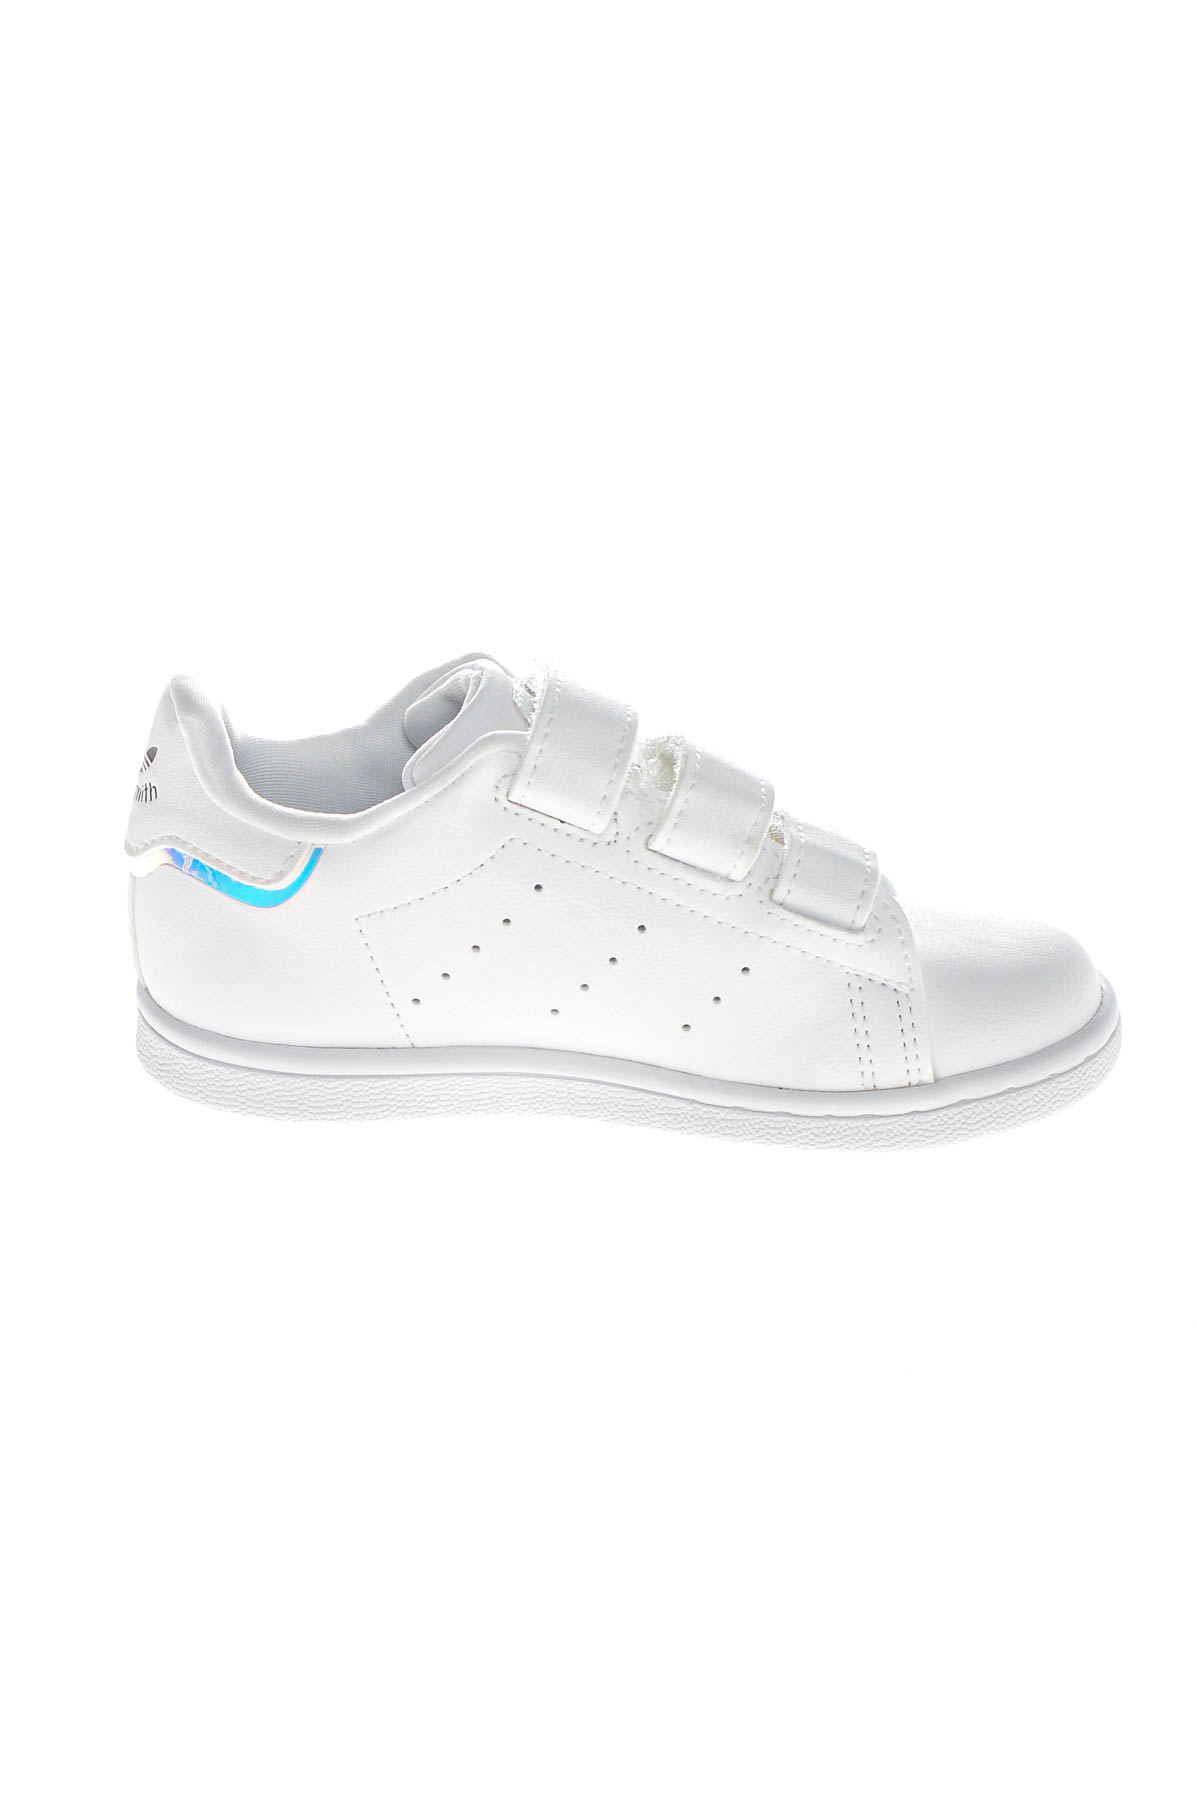 Girl's shoes - Stan Smith x Adidas - 2